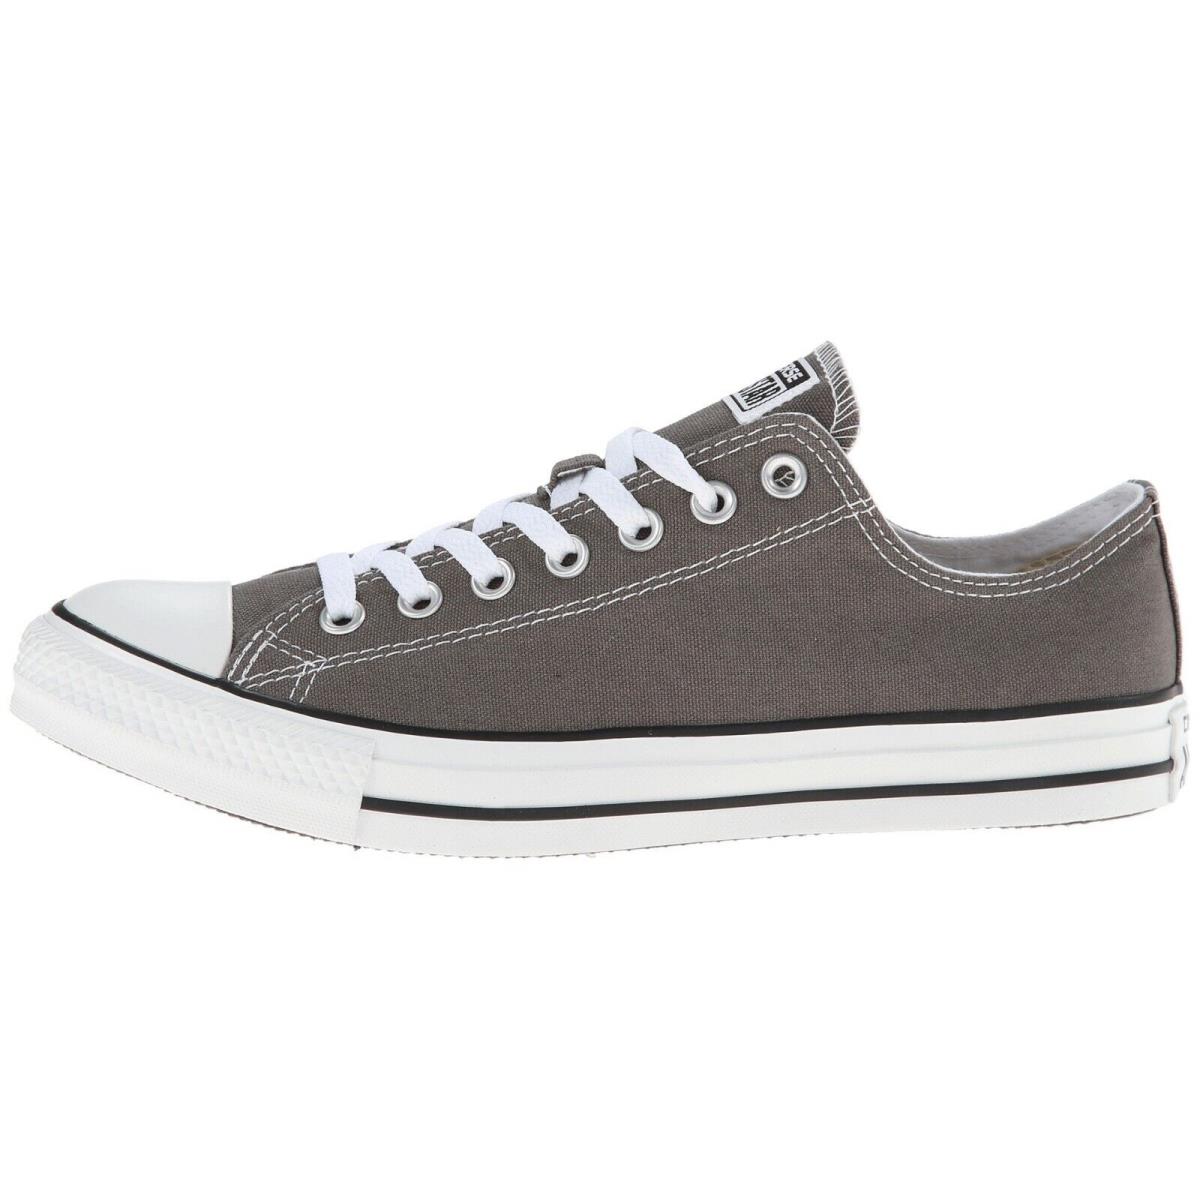 Converse Chuck Taylor All Star Low Top Unisex Canvas Shoes Sneaker Charcoal